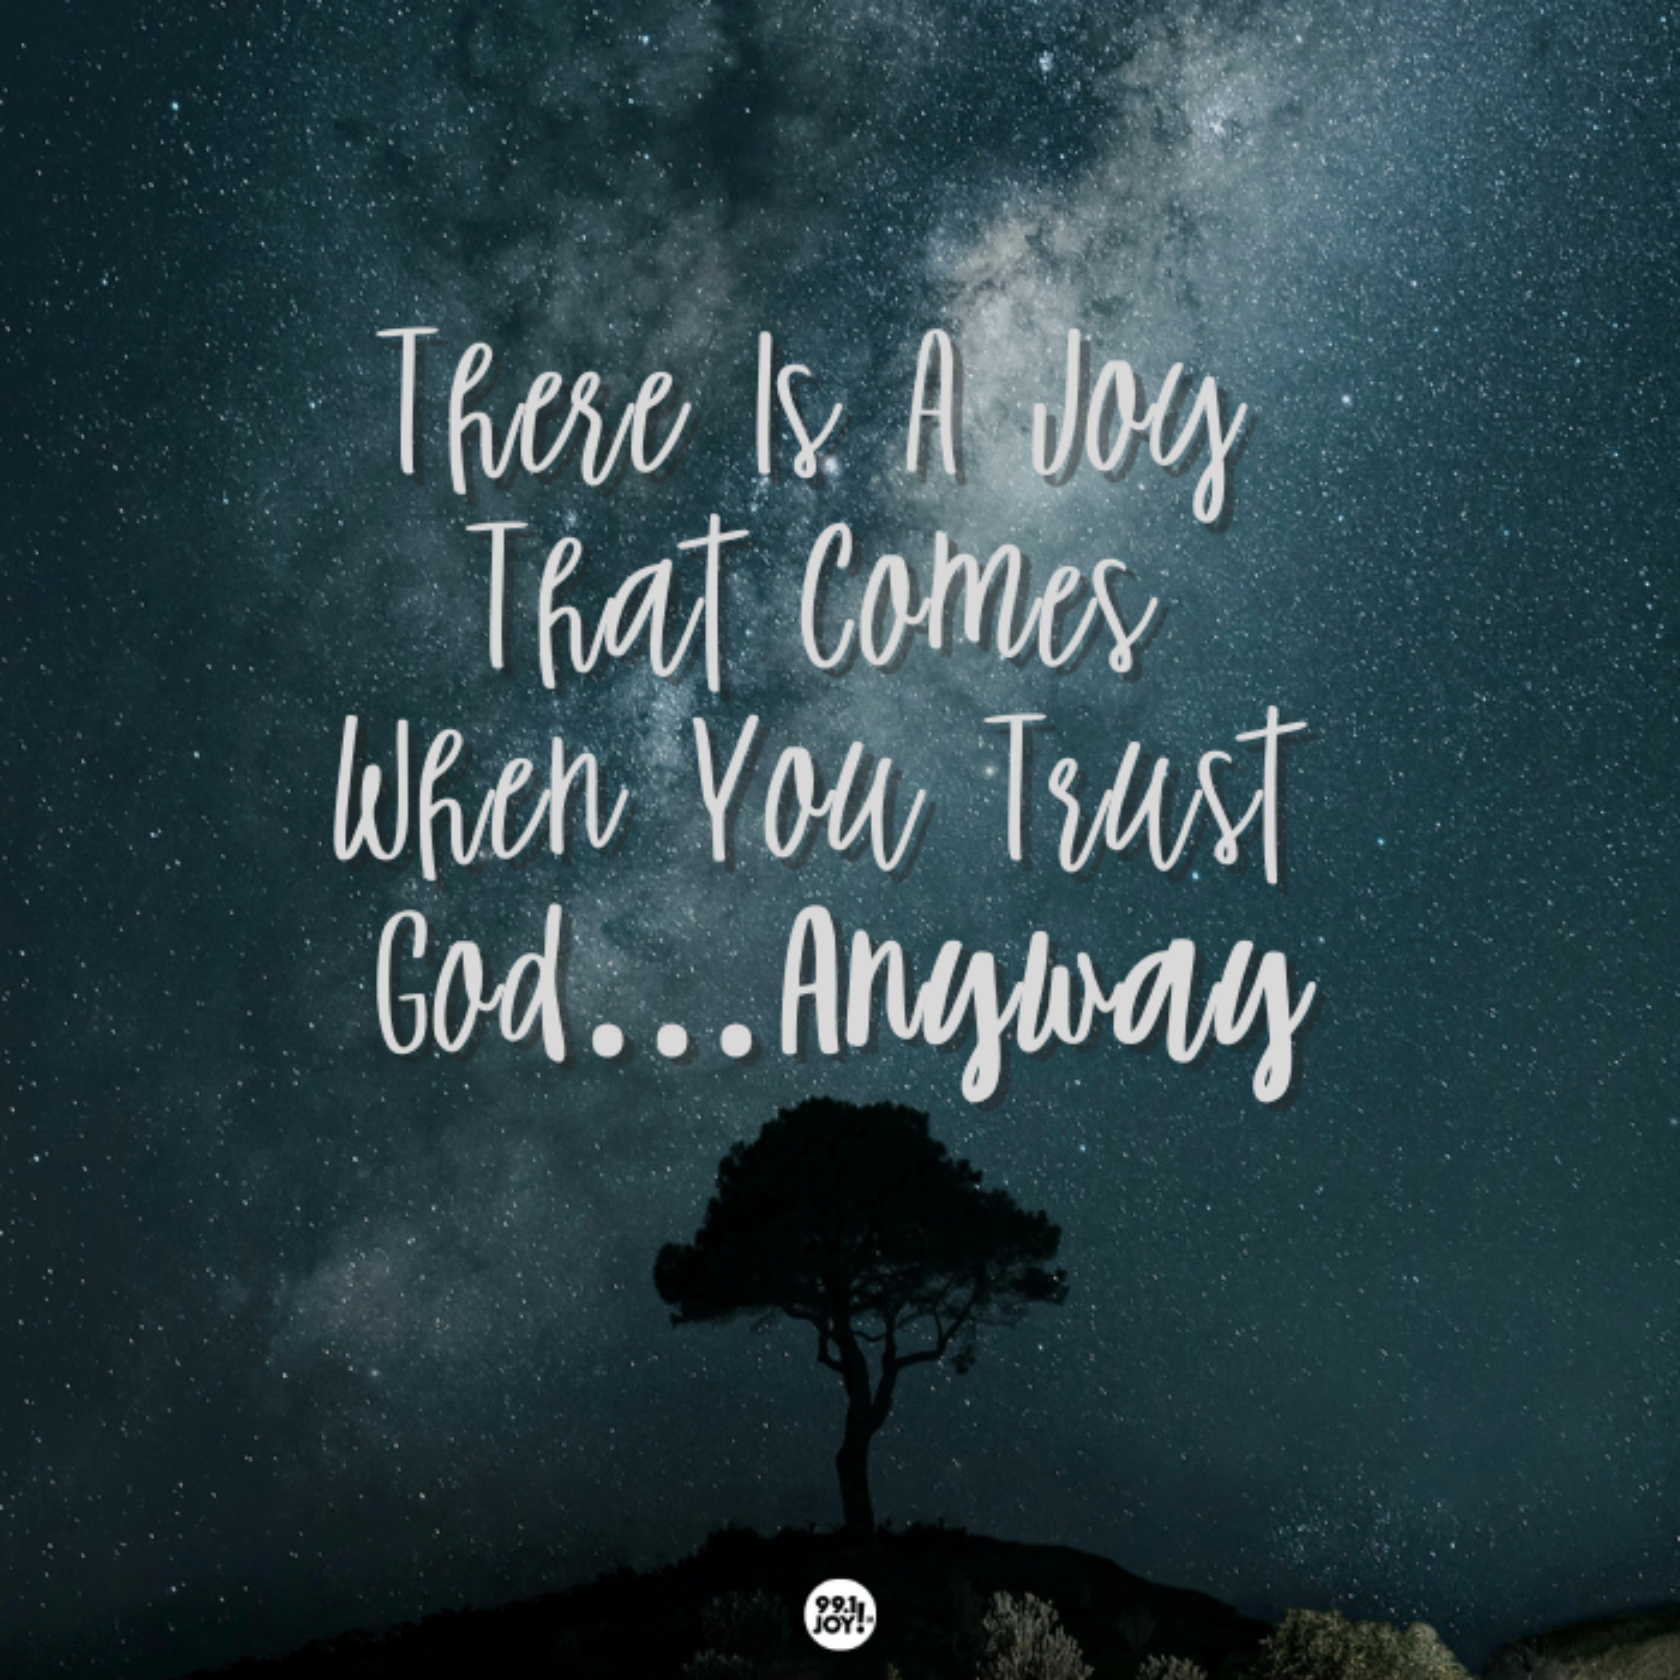 There Is A Joy That Comes When You Trust God…Anyway